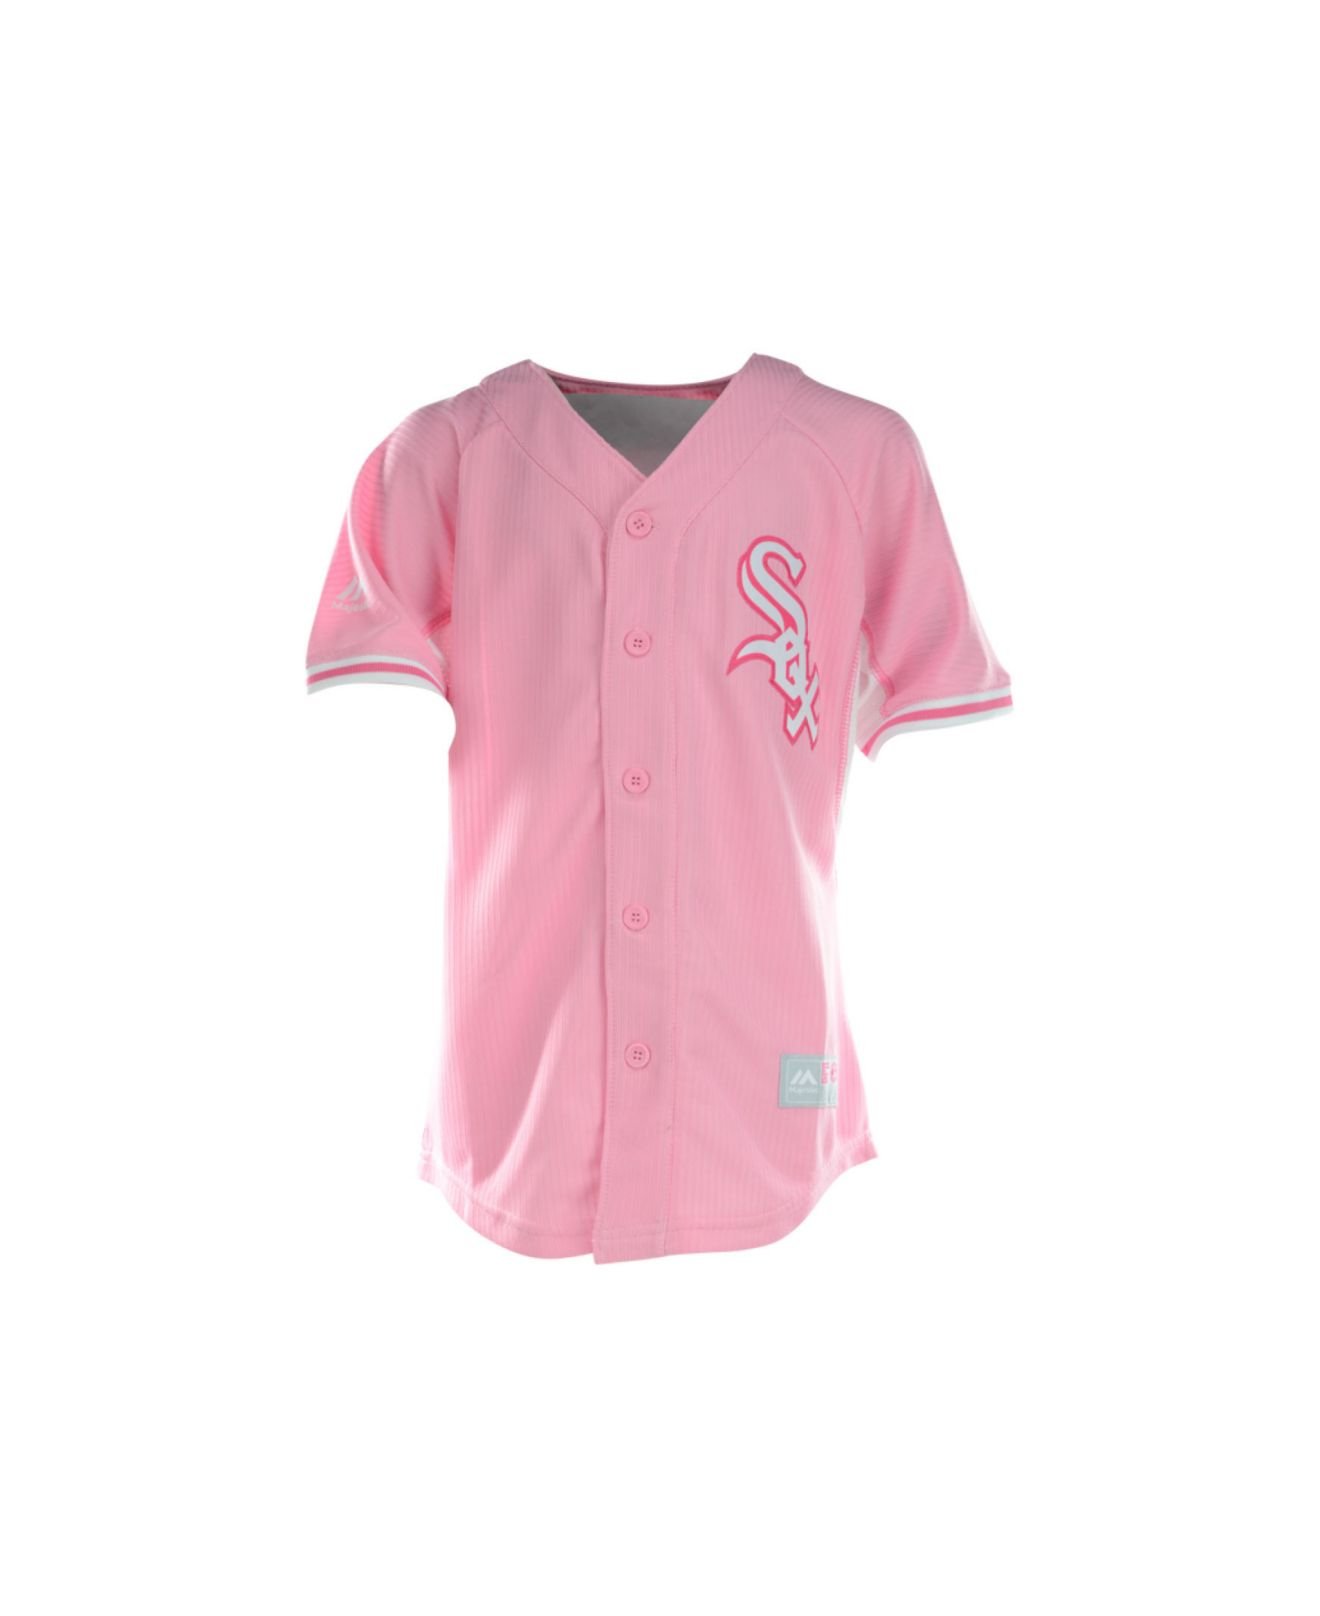 Majestic Girls' Chicago White Sox Jersey in Pink